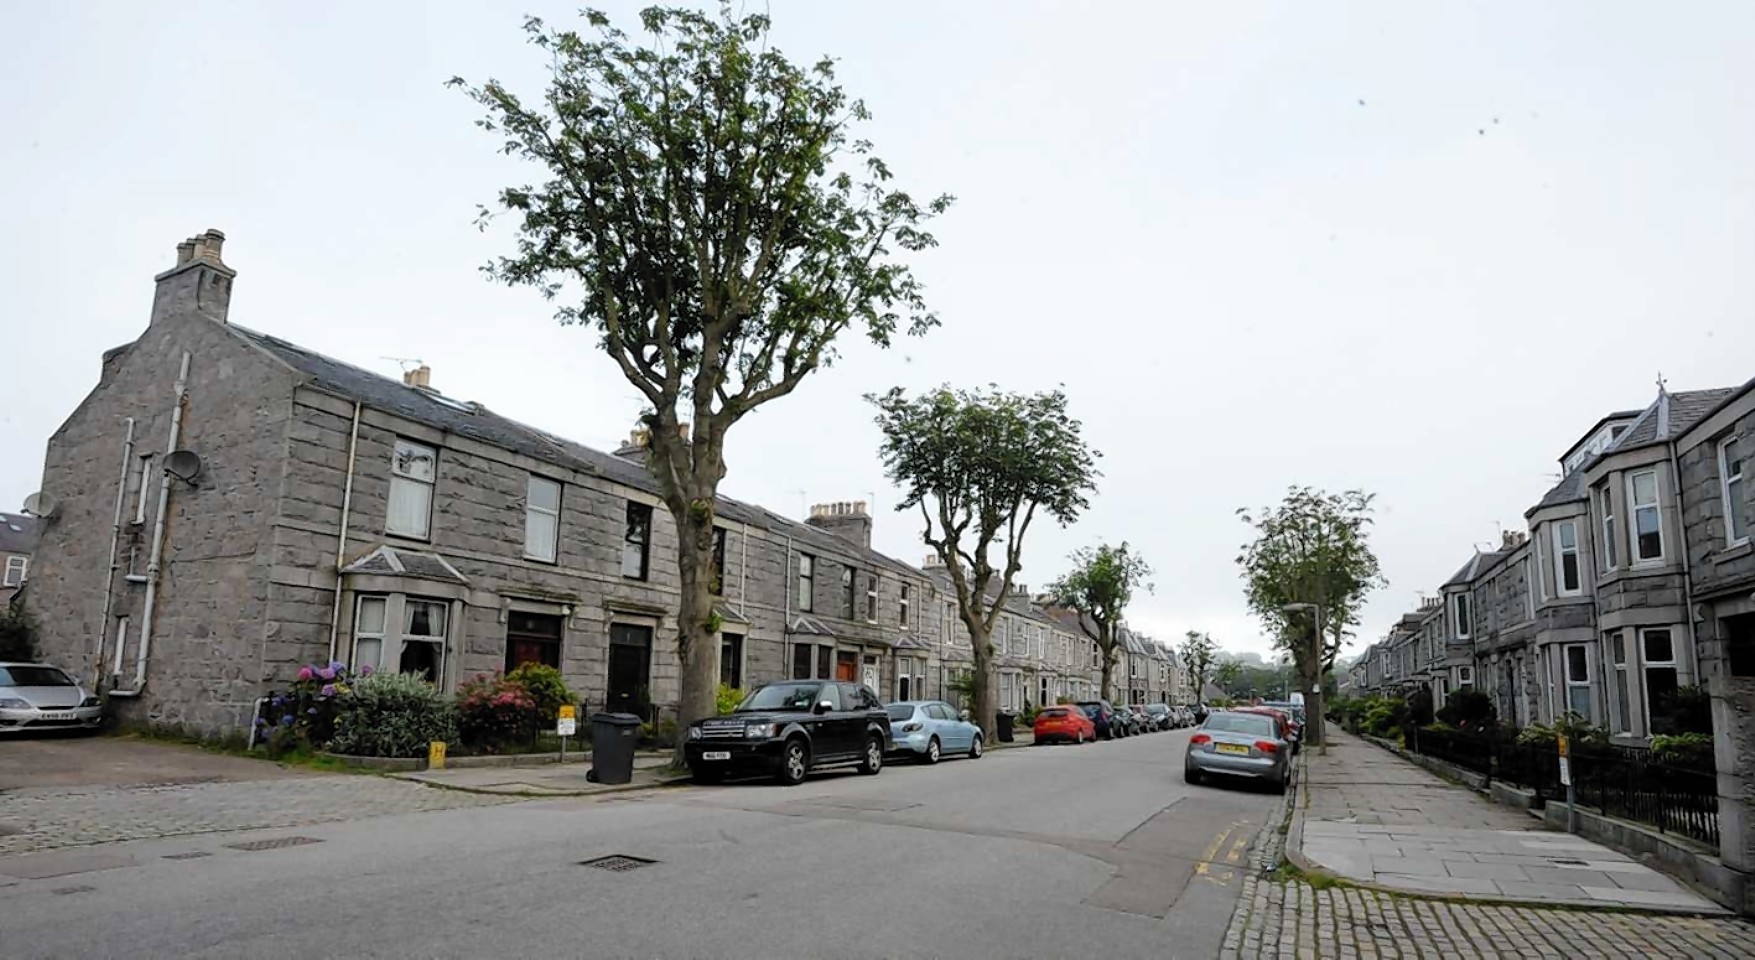 A controversial HMO was recently approved on Aberdeen's Rosebery Street